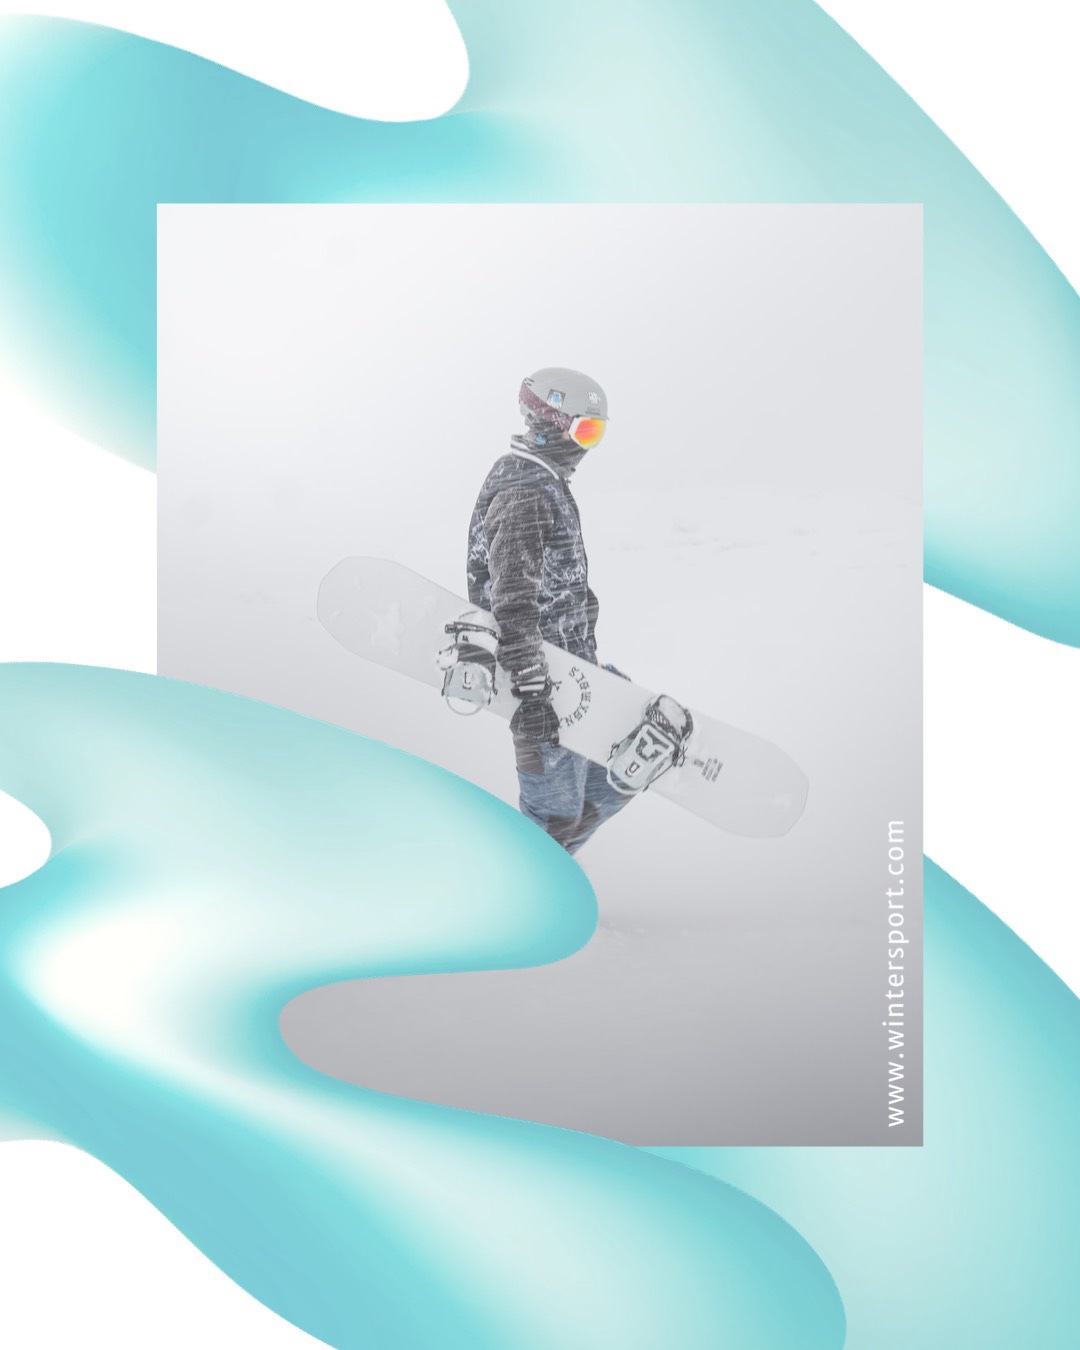 A Man With A Snowboard In His Hand Sports Template